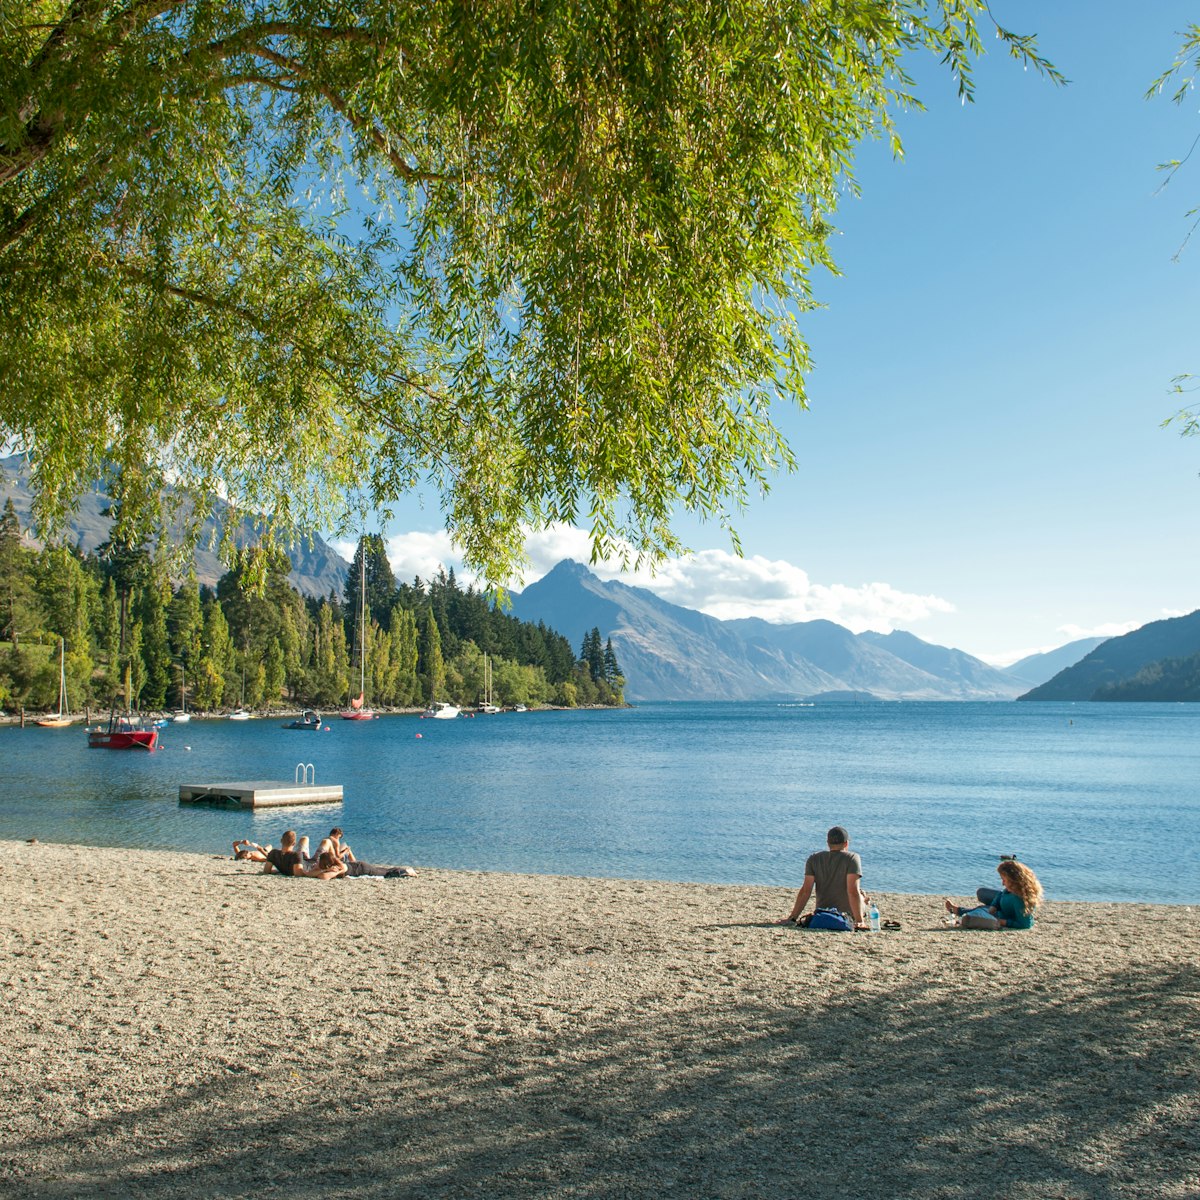 Tourists relax at the shore of Lake Wakatipu in Queenstown.